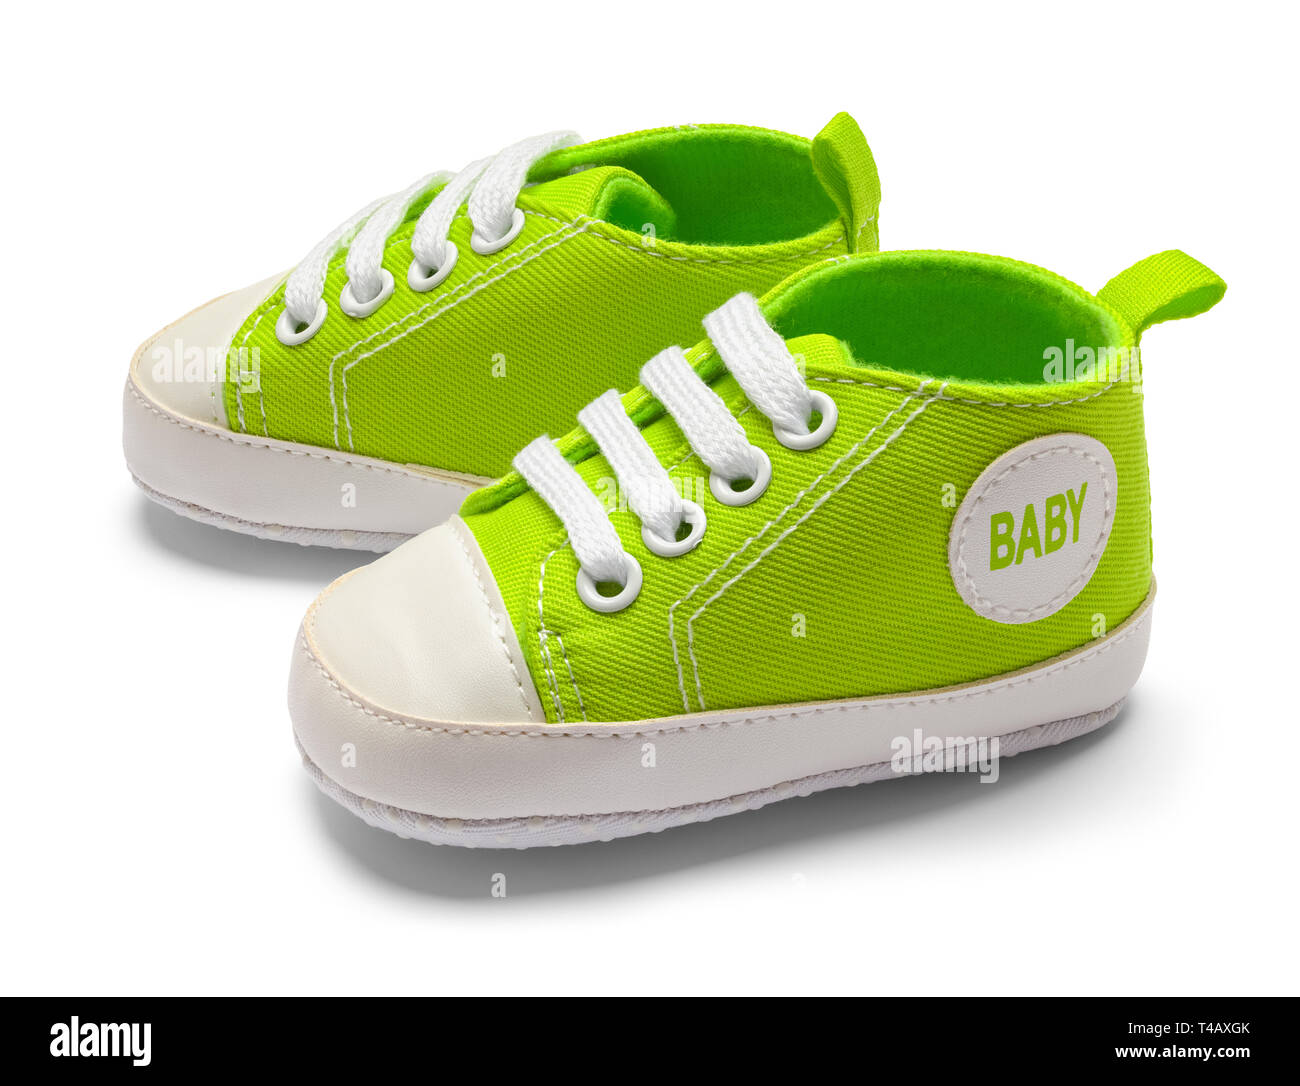 Green Baby Shoes Side View Isolated on White Background. Stock Photo